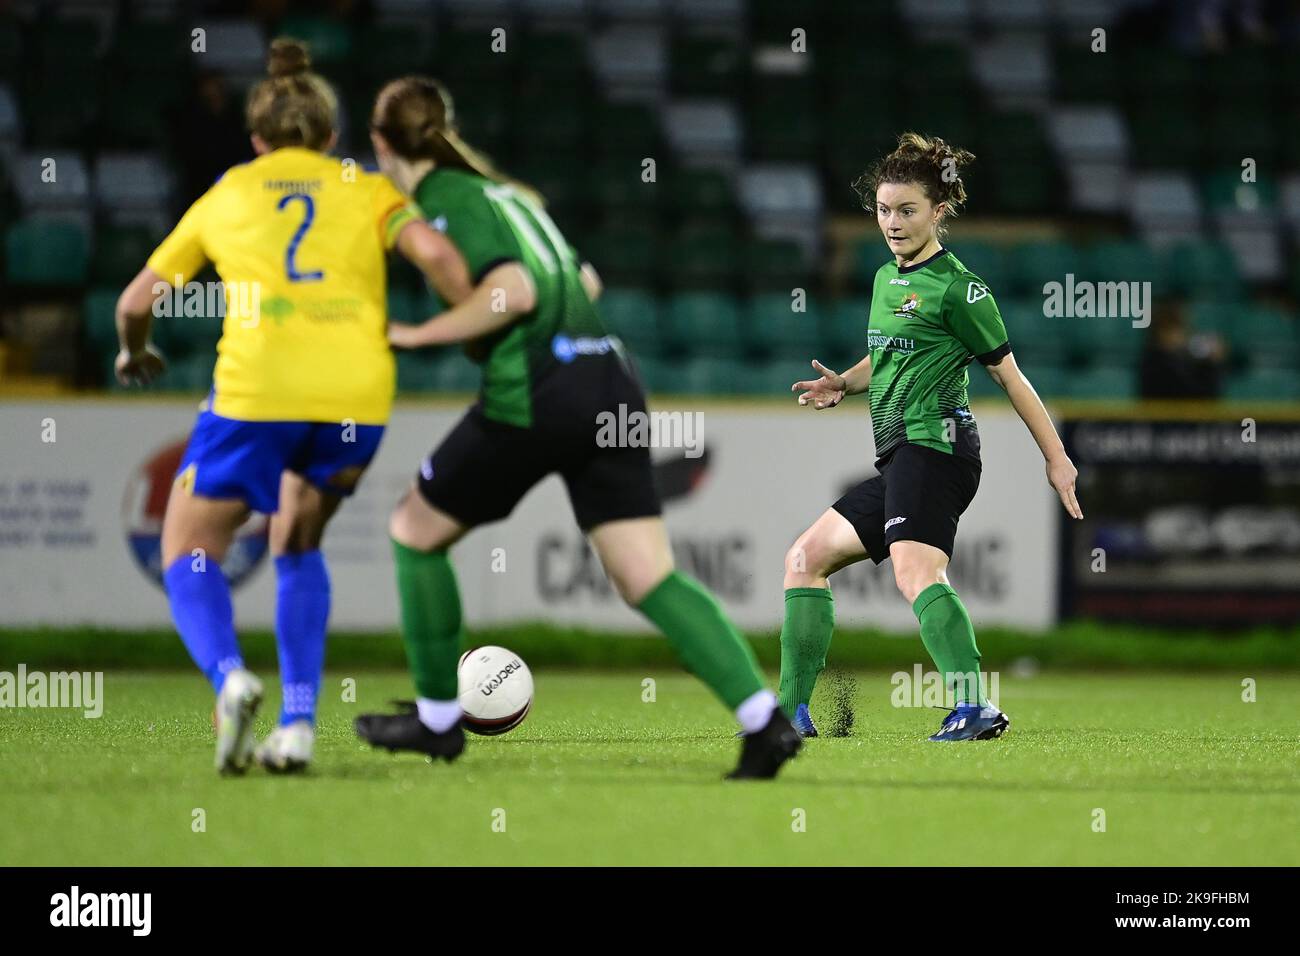 Barry, Wales. 27th Oct, 2022. Shauna Chambers of Aberystwyth Town FC  - Mandatory by-line: Ashley Crowden  - 27/10/2022 - FOOTBALL - Jenner Park Stadium - Barry, Wales - Barry Town United Women vs Aberystwyth Town Women’s FC - Genero Adran Premier Phase 1 22/23 Credit: Ashley Crowden/Alamy Live News Stock Photo